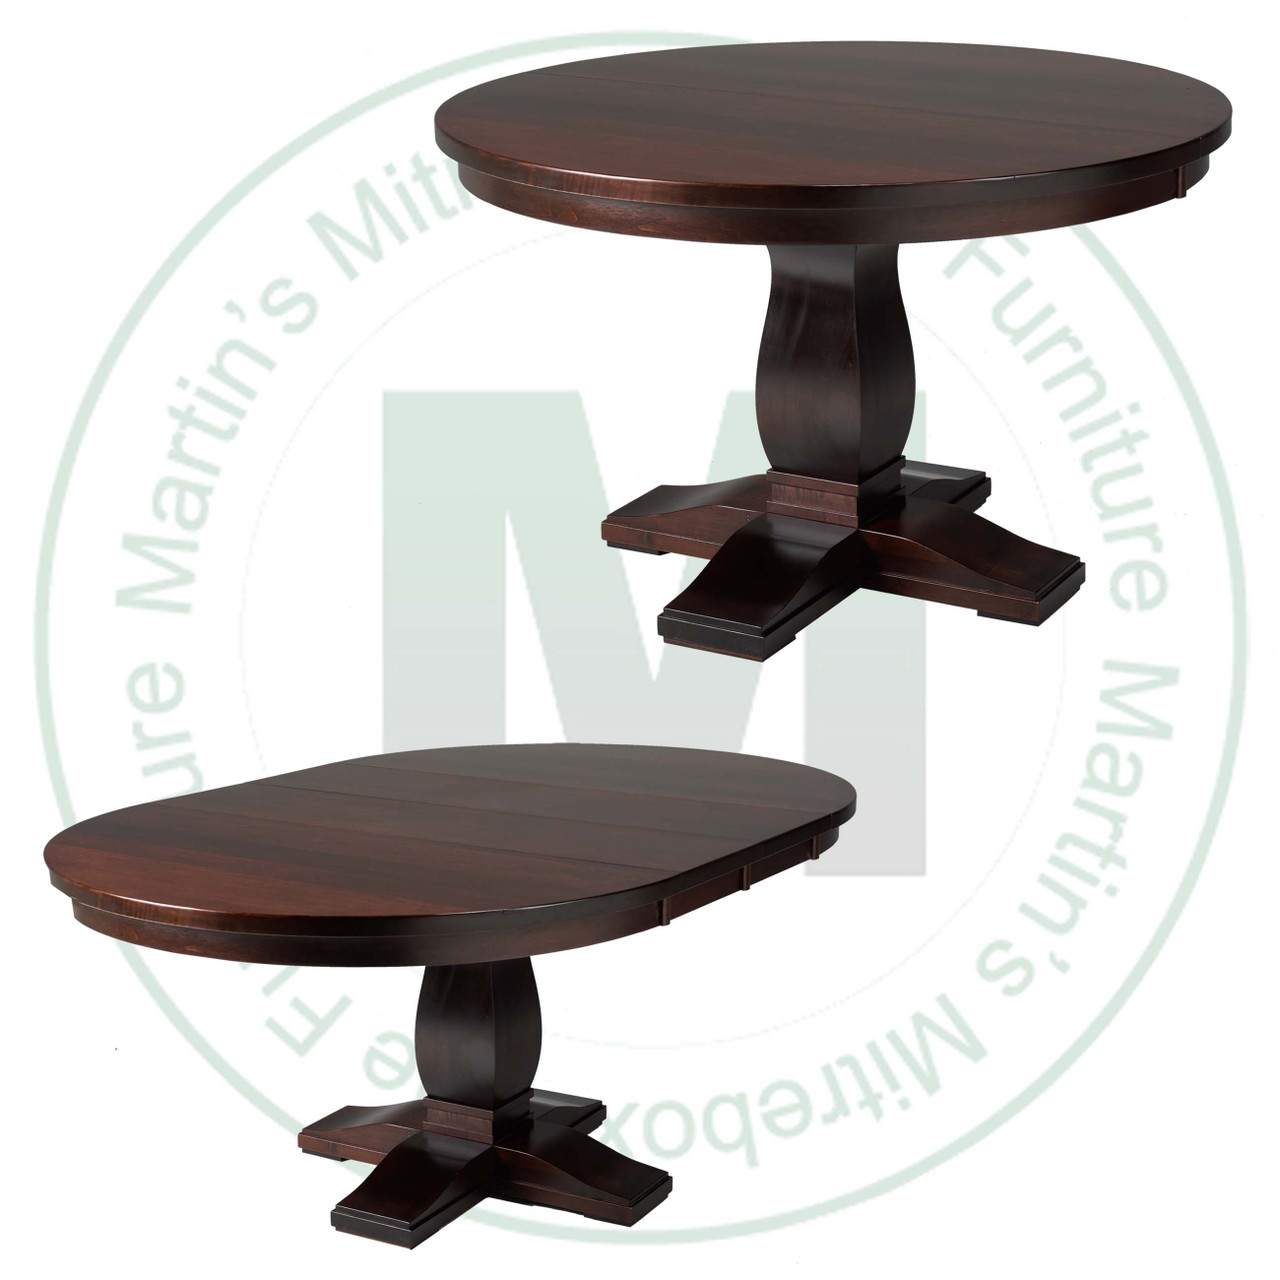 Wormy Maple Valencia Single Pedestal Table 48''D x 48''W x 30''H With 1 - 12'' Leaf Table